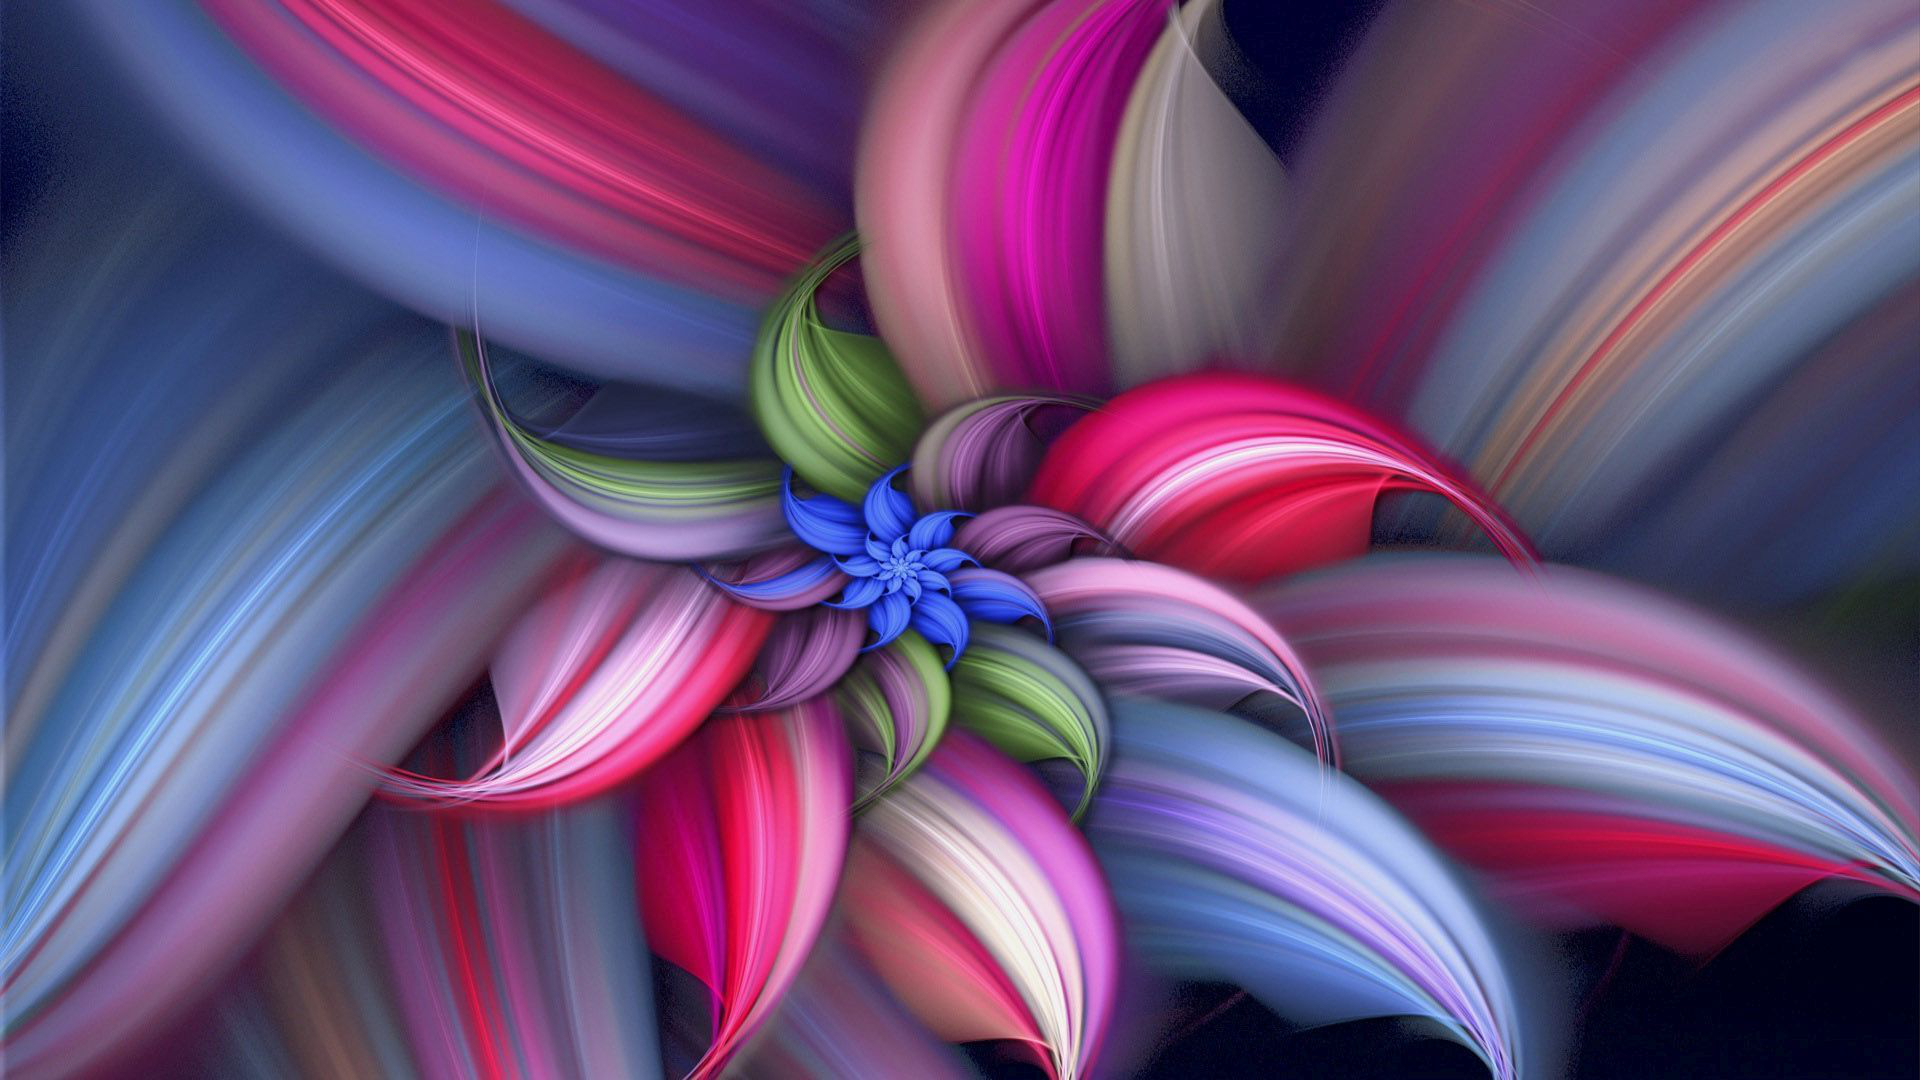 3d hd wallpapers of flowers for mobile